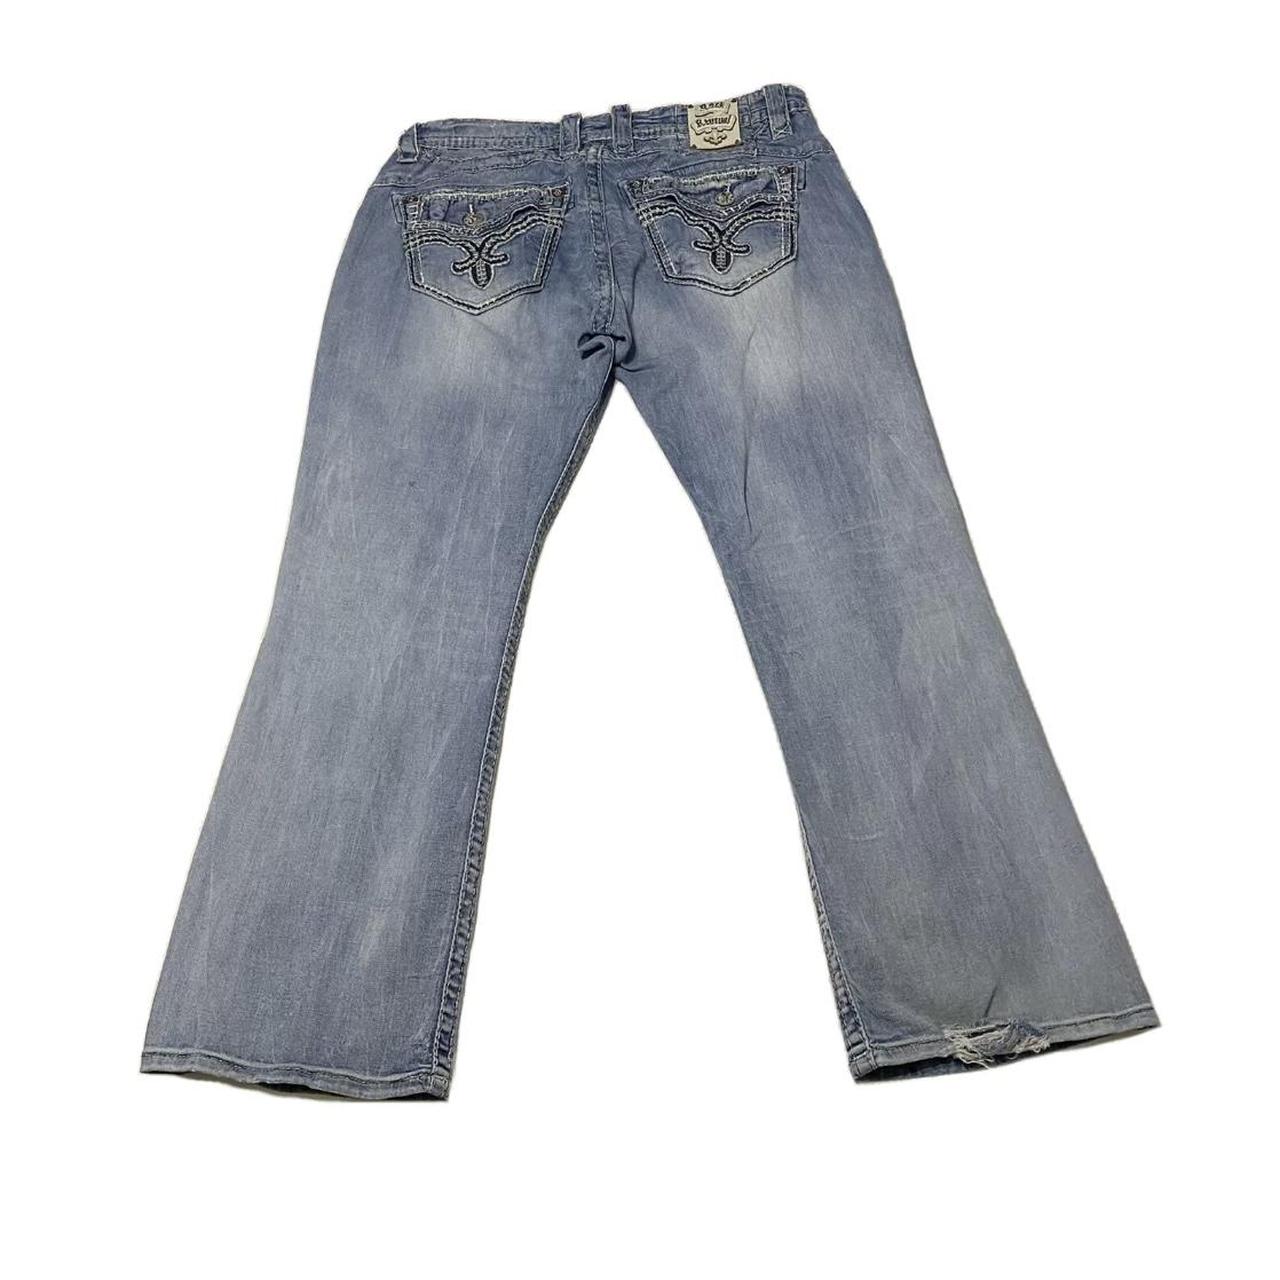 Product Image 1 - Rock Revival Denim Jeans 
Real